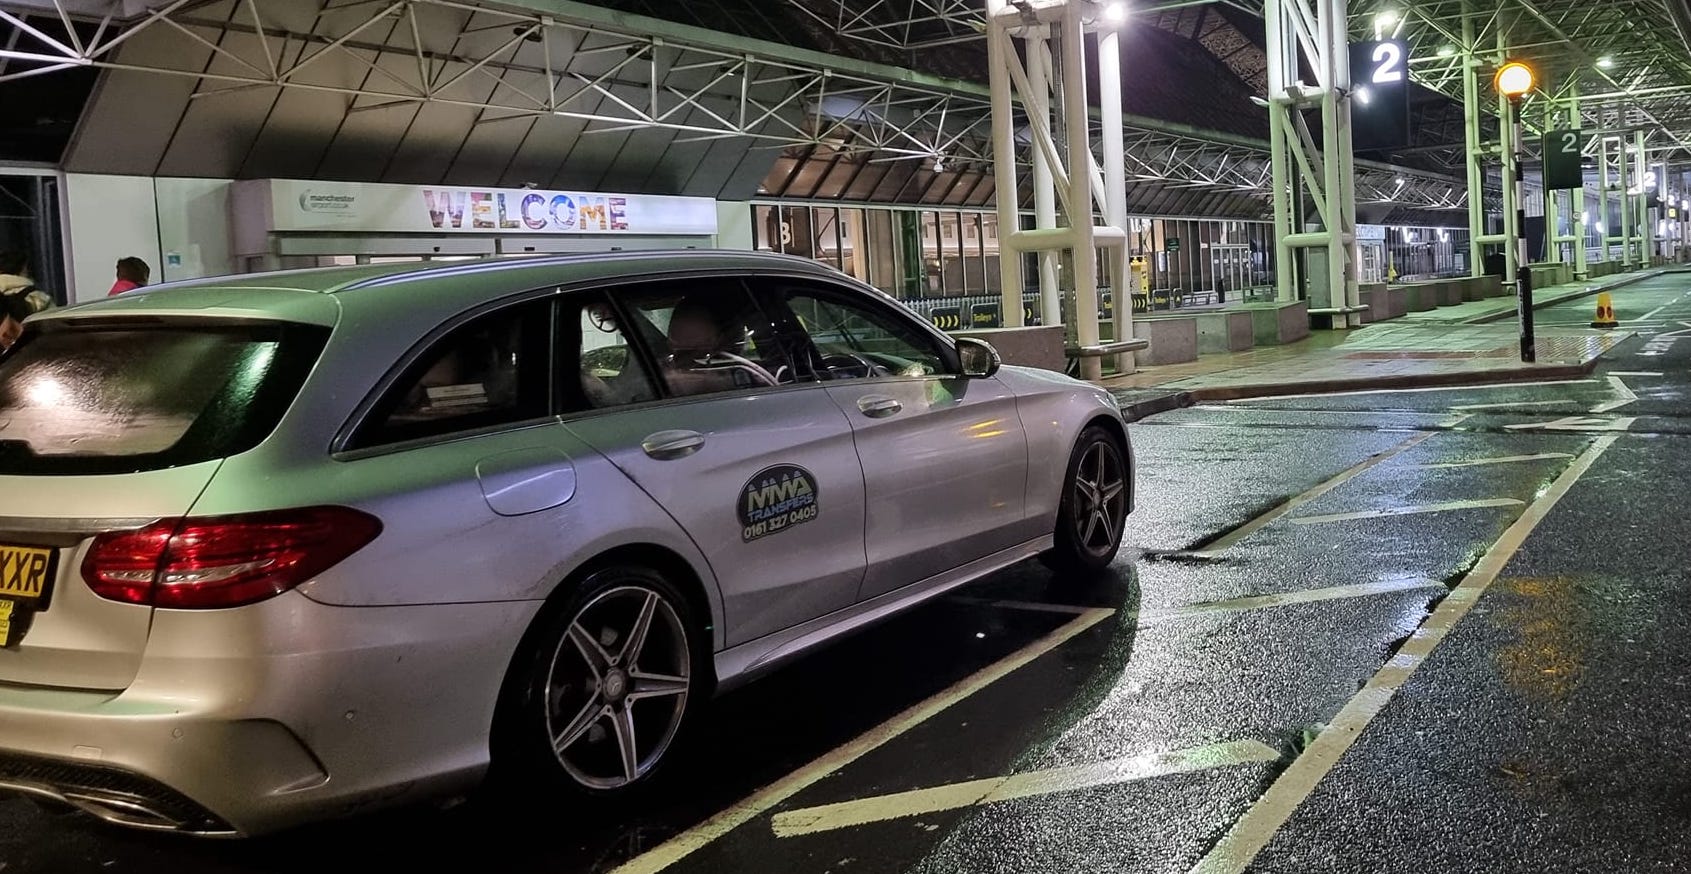 Take a Taxi from Manchester Airport to Southport with a free Meet and Greet Service